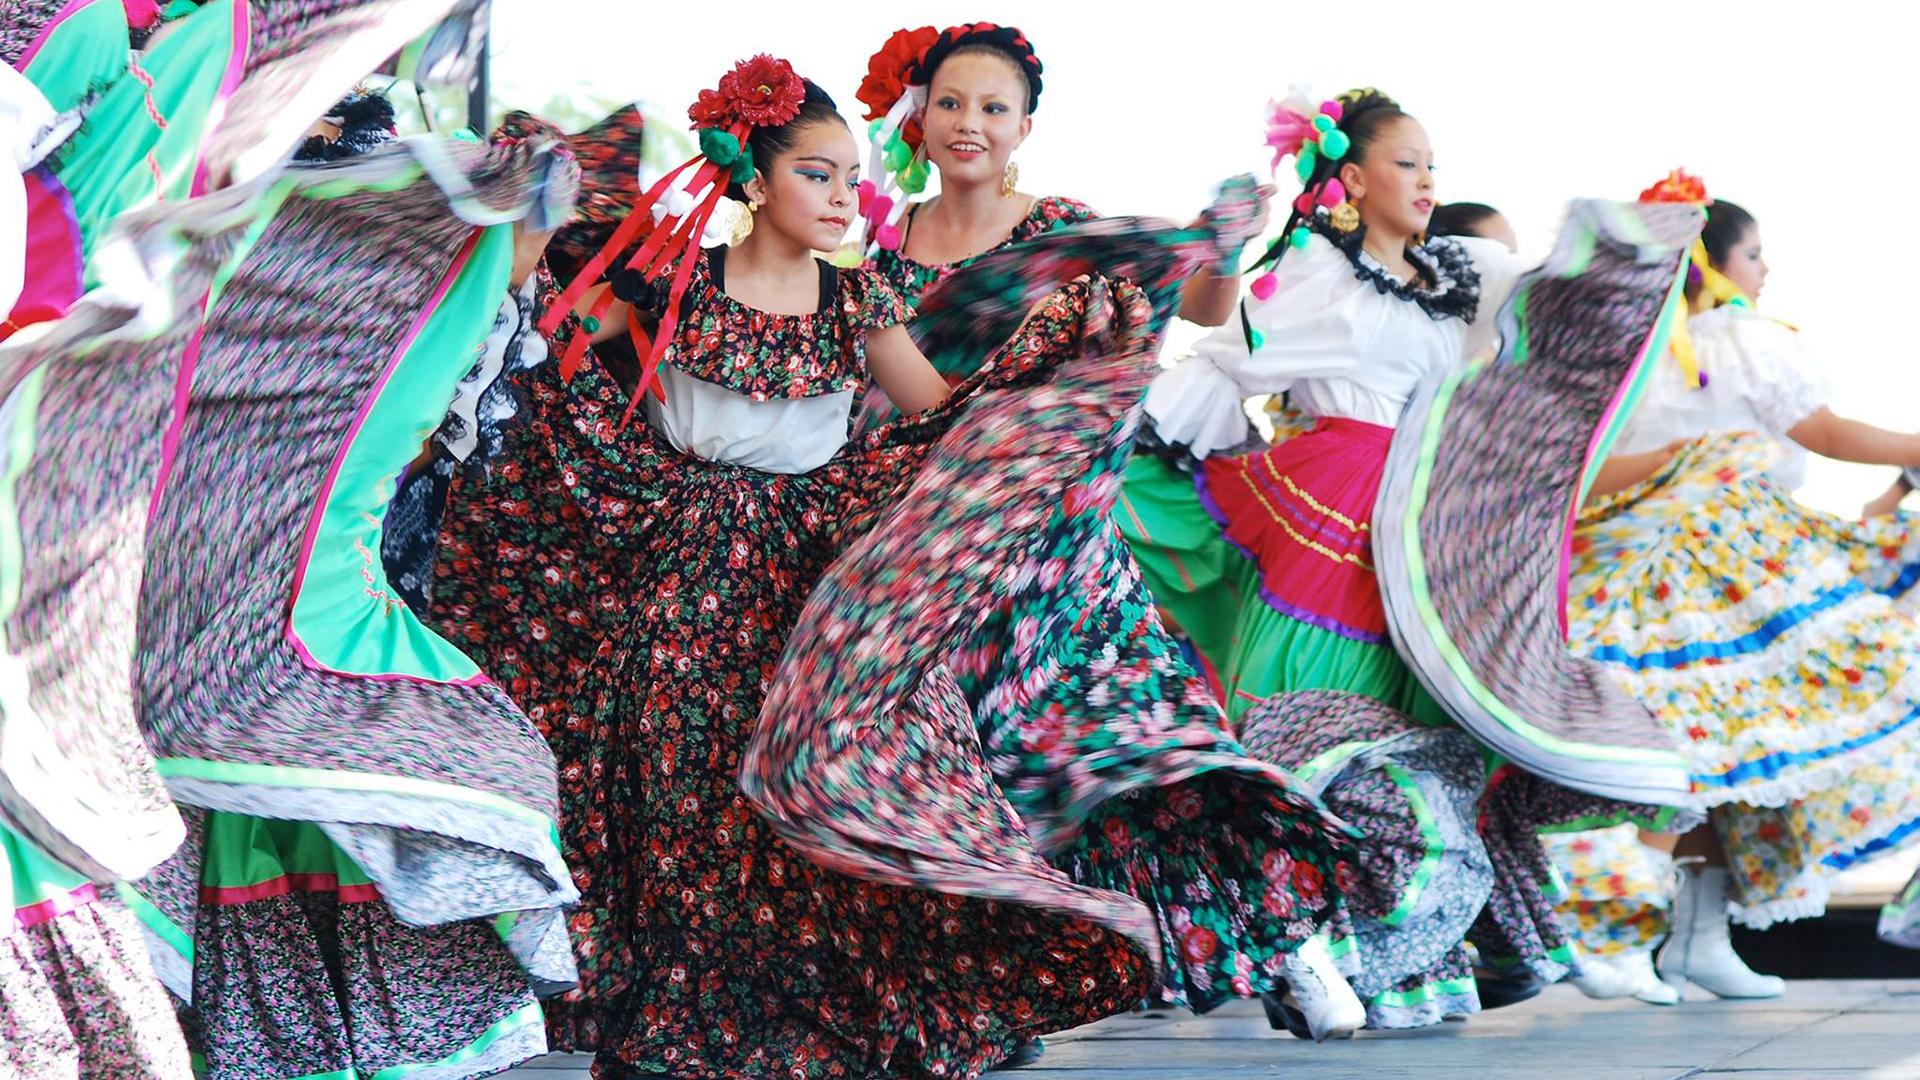 Enjoy activities and celebrations around Los Angeles for National Hispanic Heritage Month